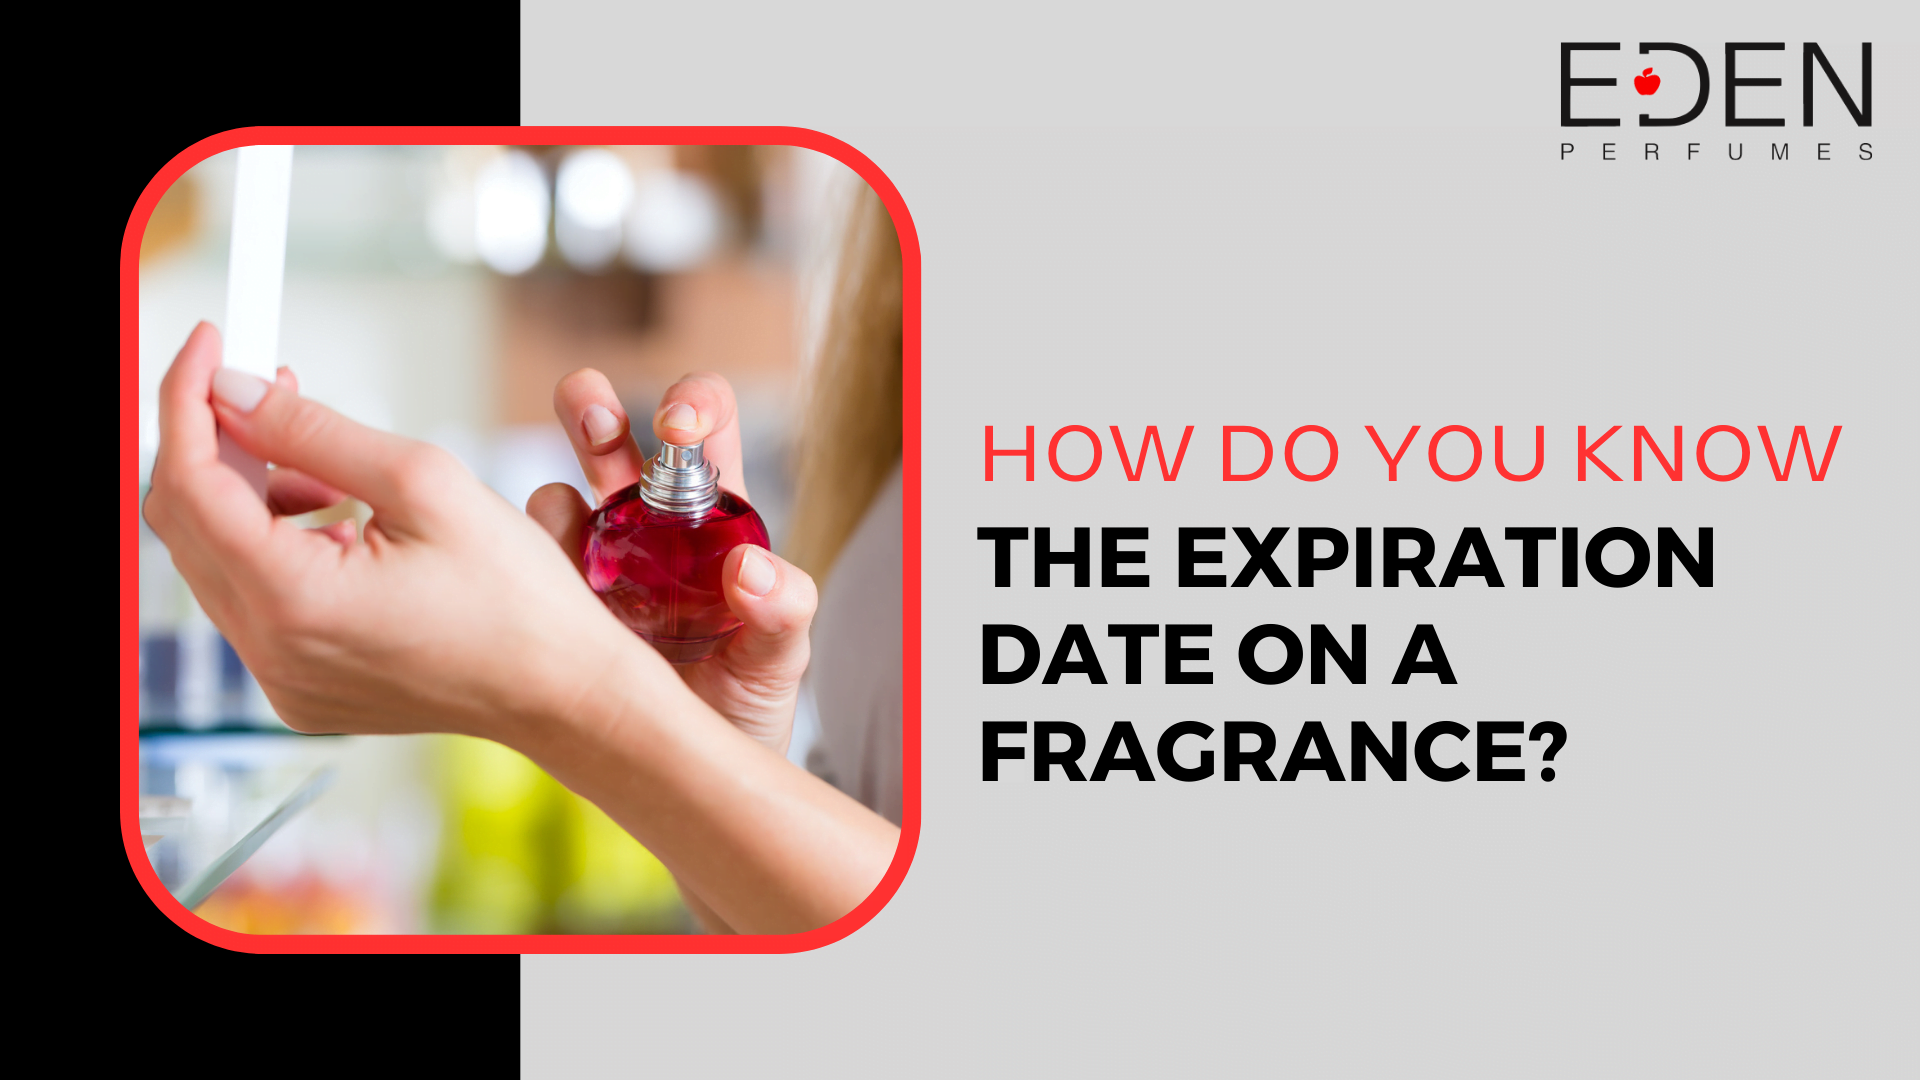 How do you know the expiration date on a fragrance?